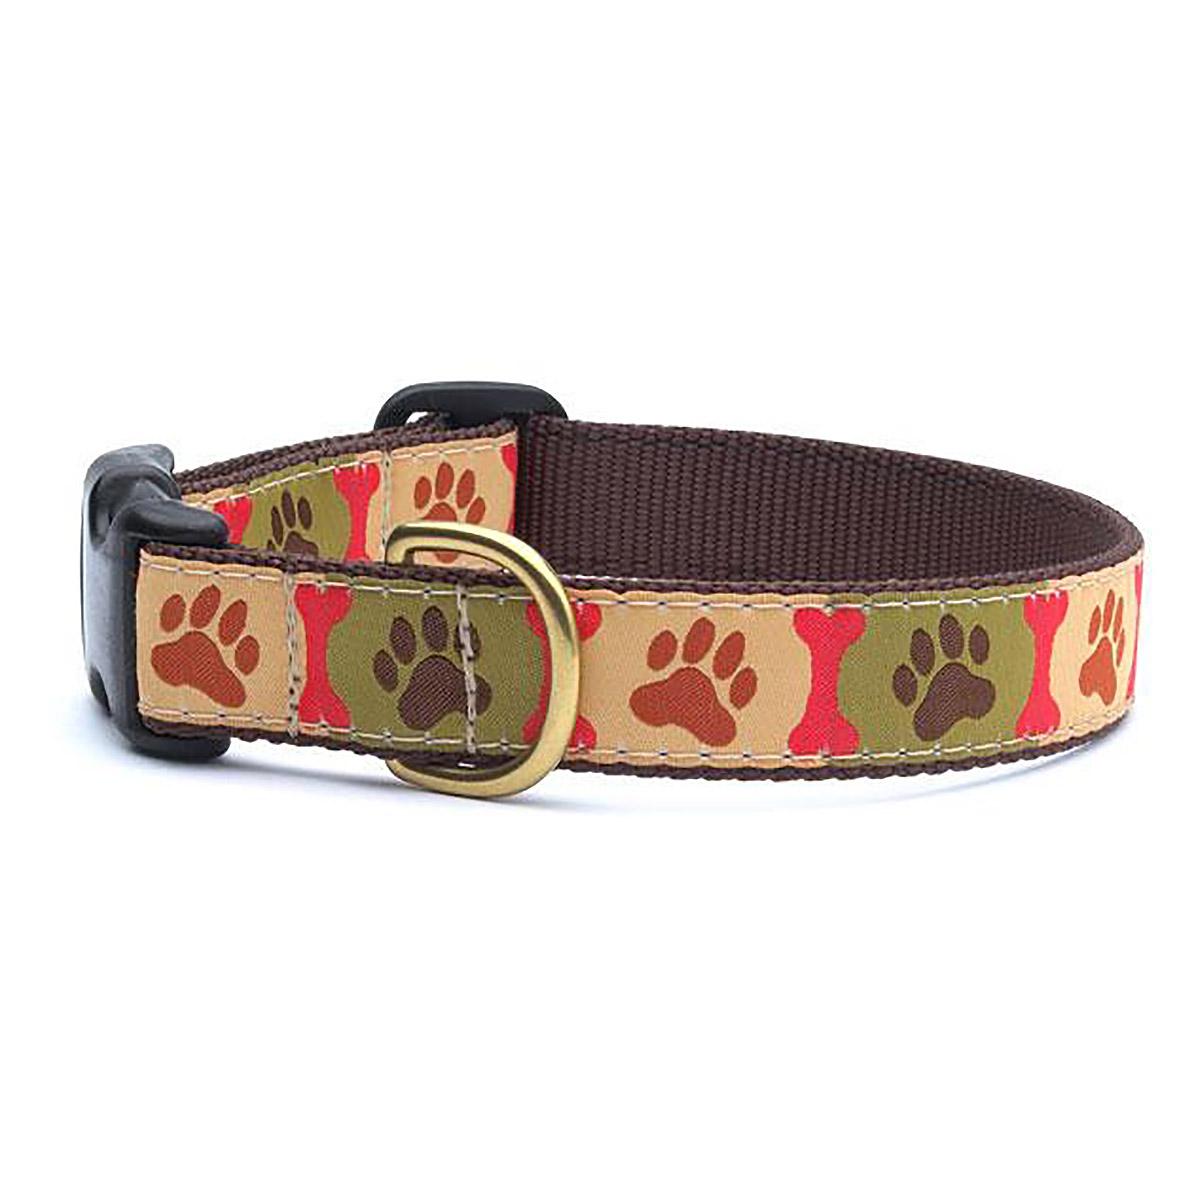 Pawprints Dog Collar by Up Country